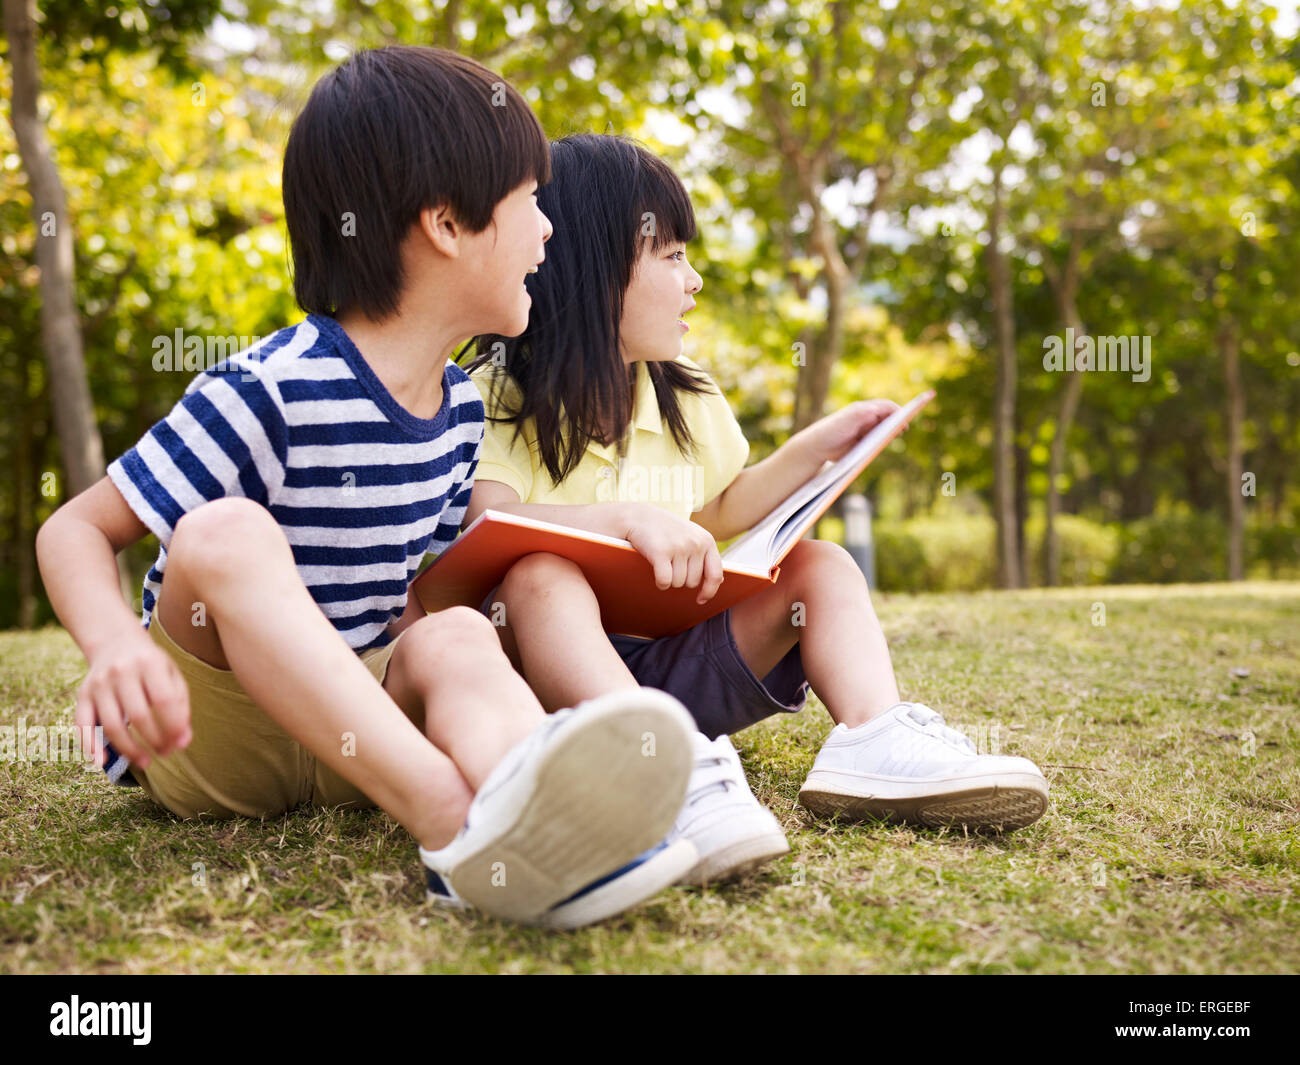 children playing outdoors Stock Photo